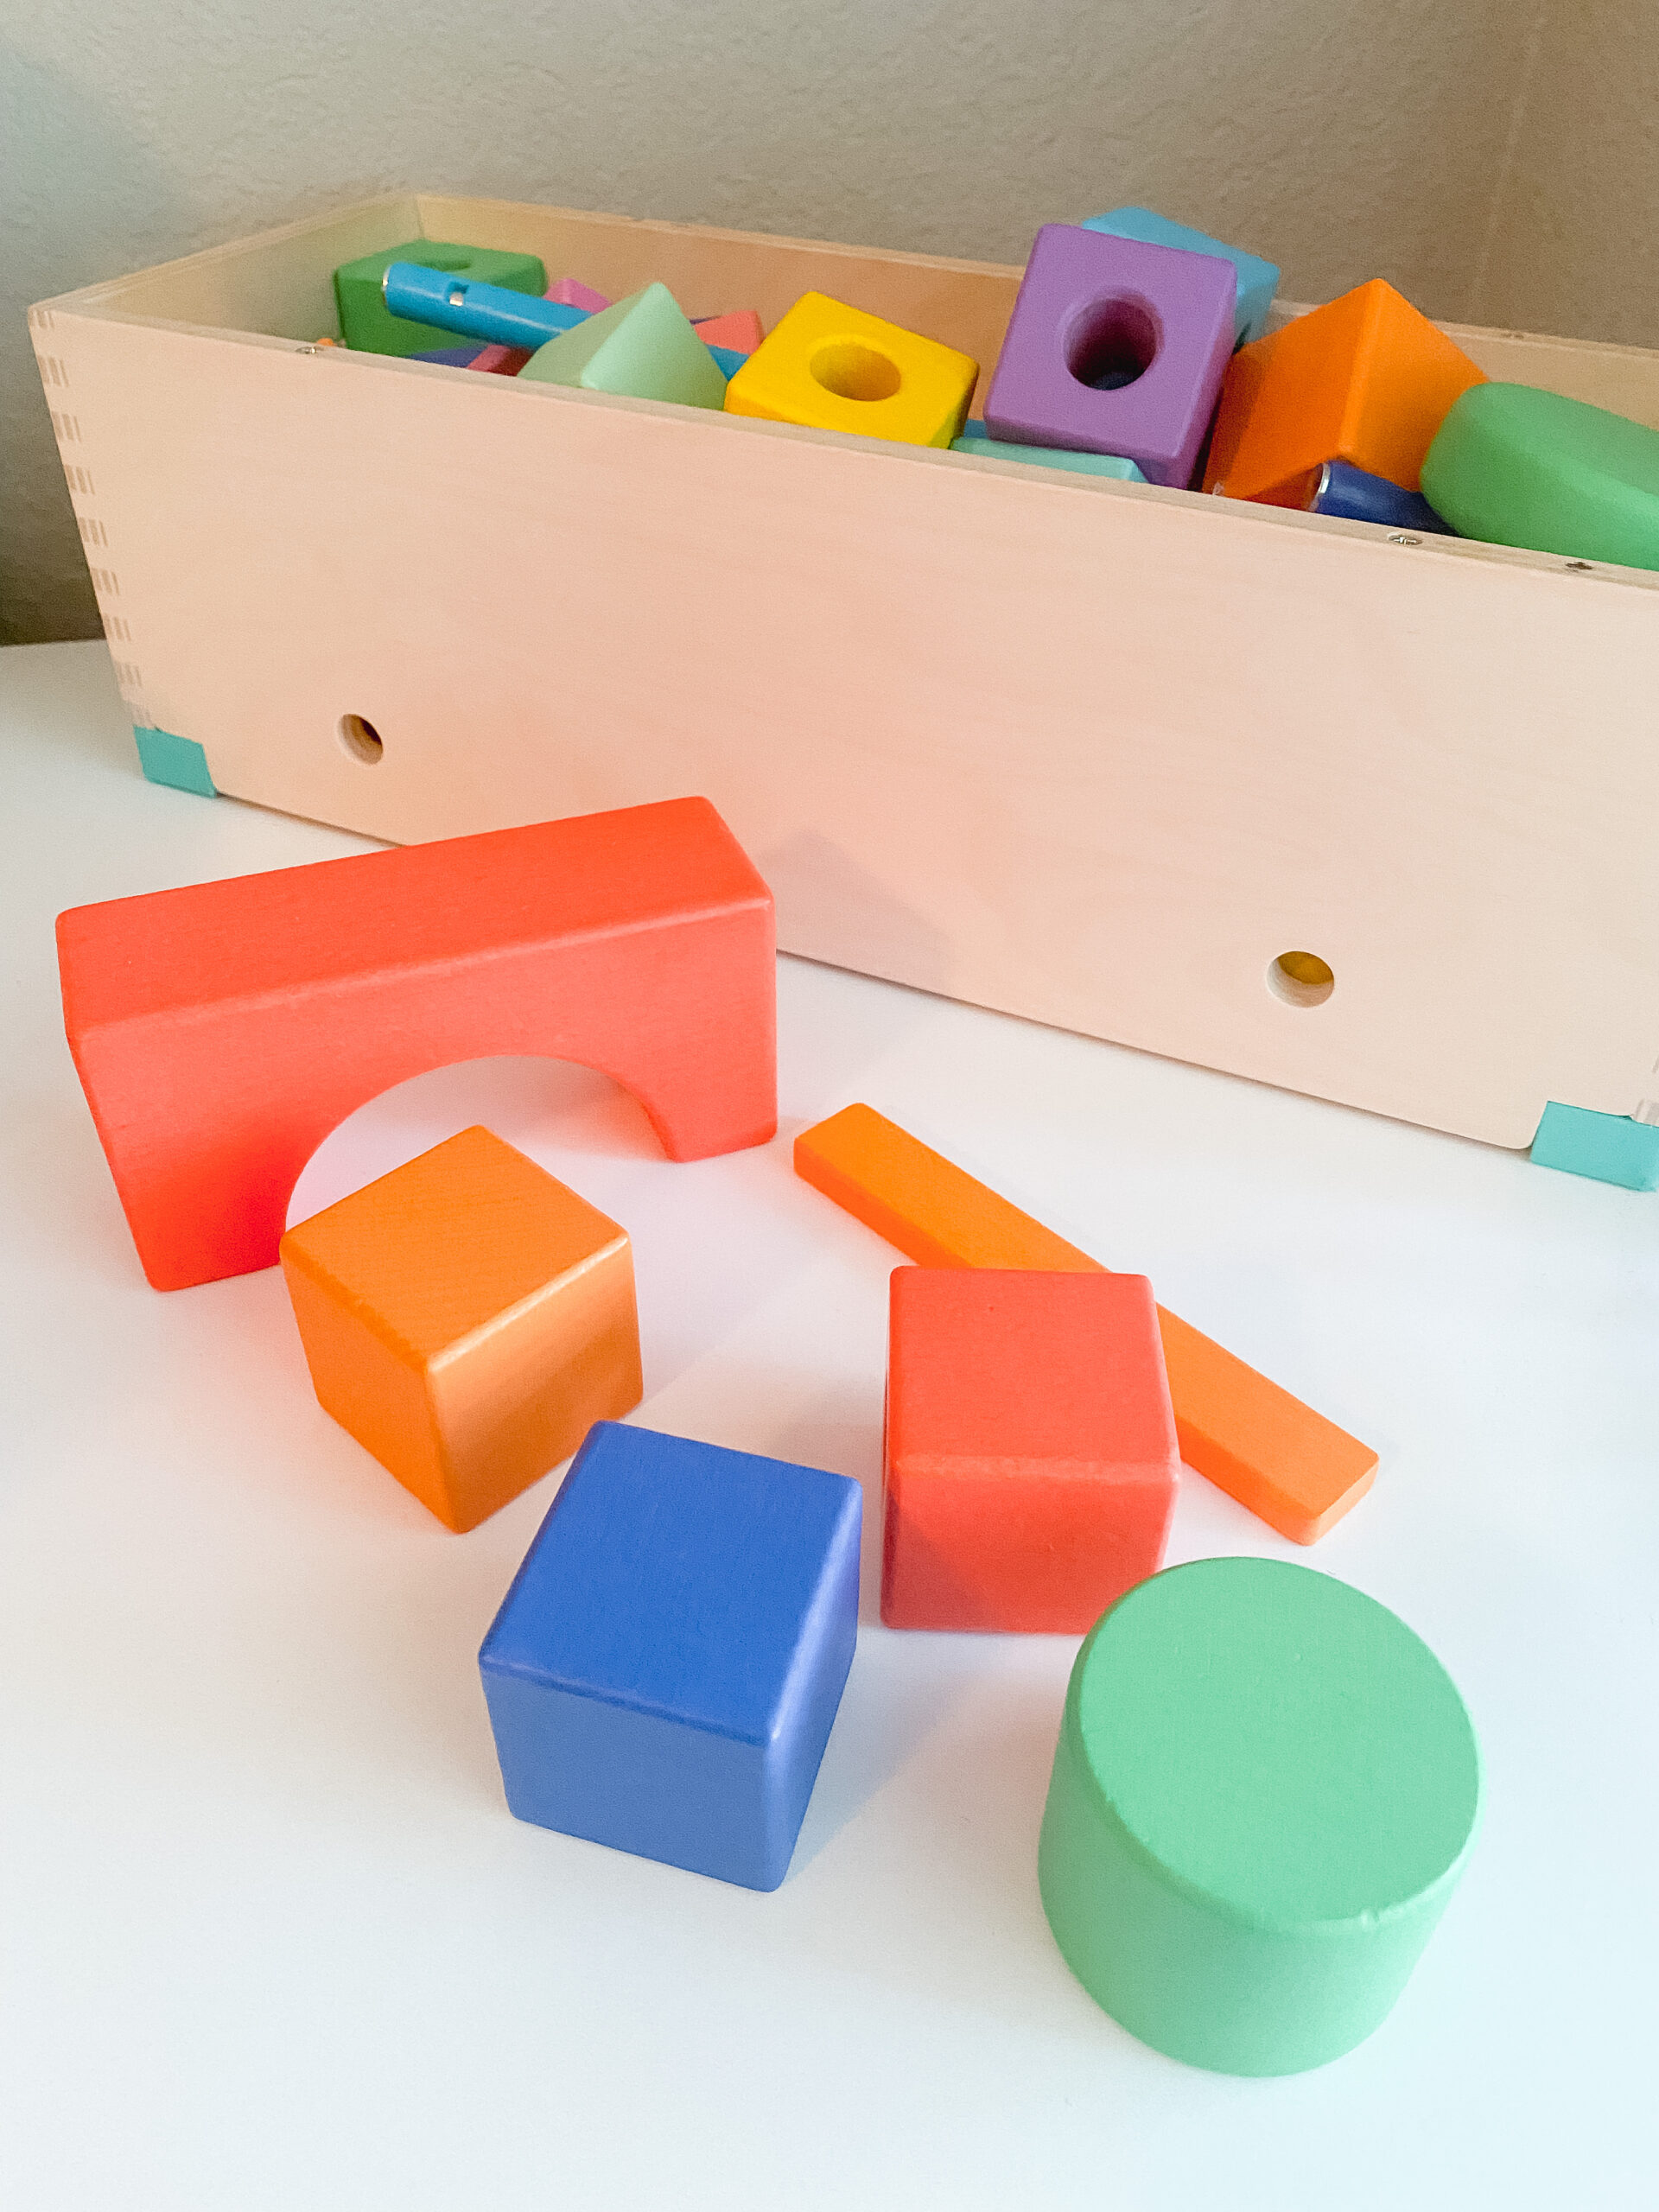 Picture features an assortment of different colors and shapes of blocks by Lovevery. The blocks are apart of Lovevery's "Block Set."